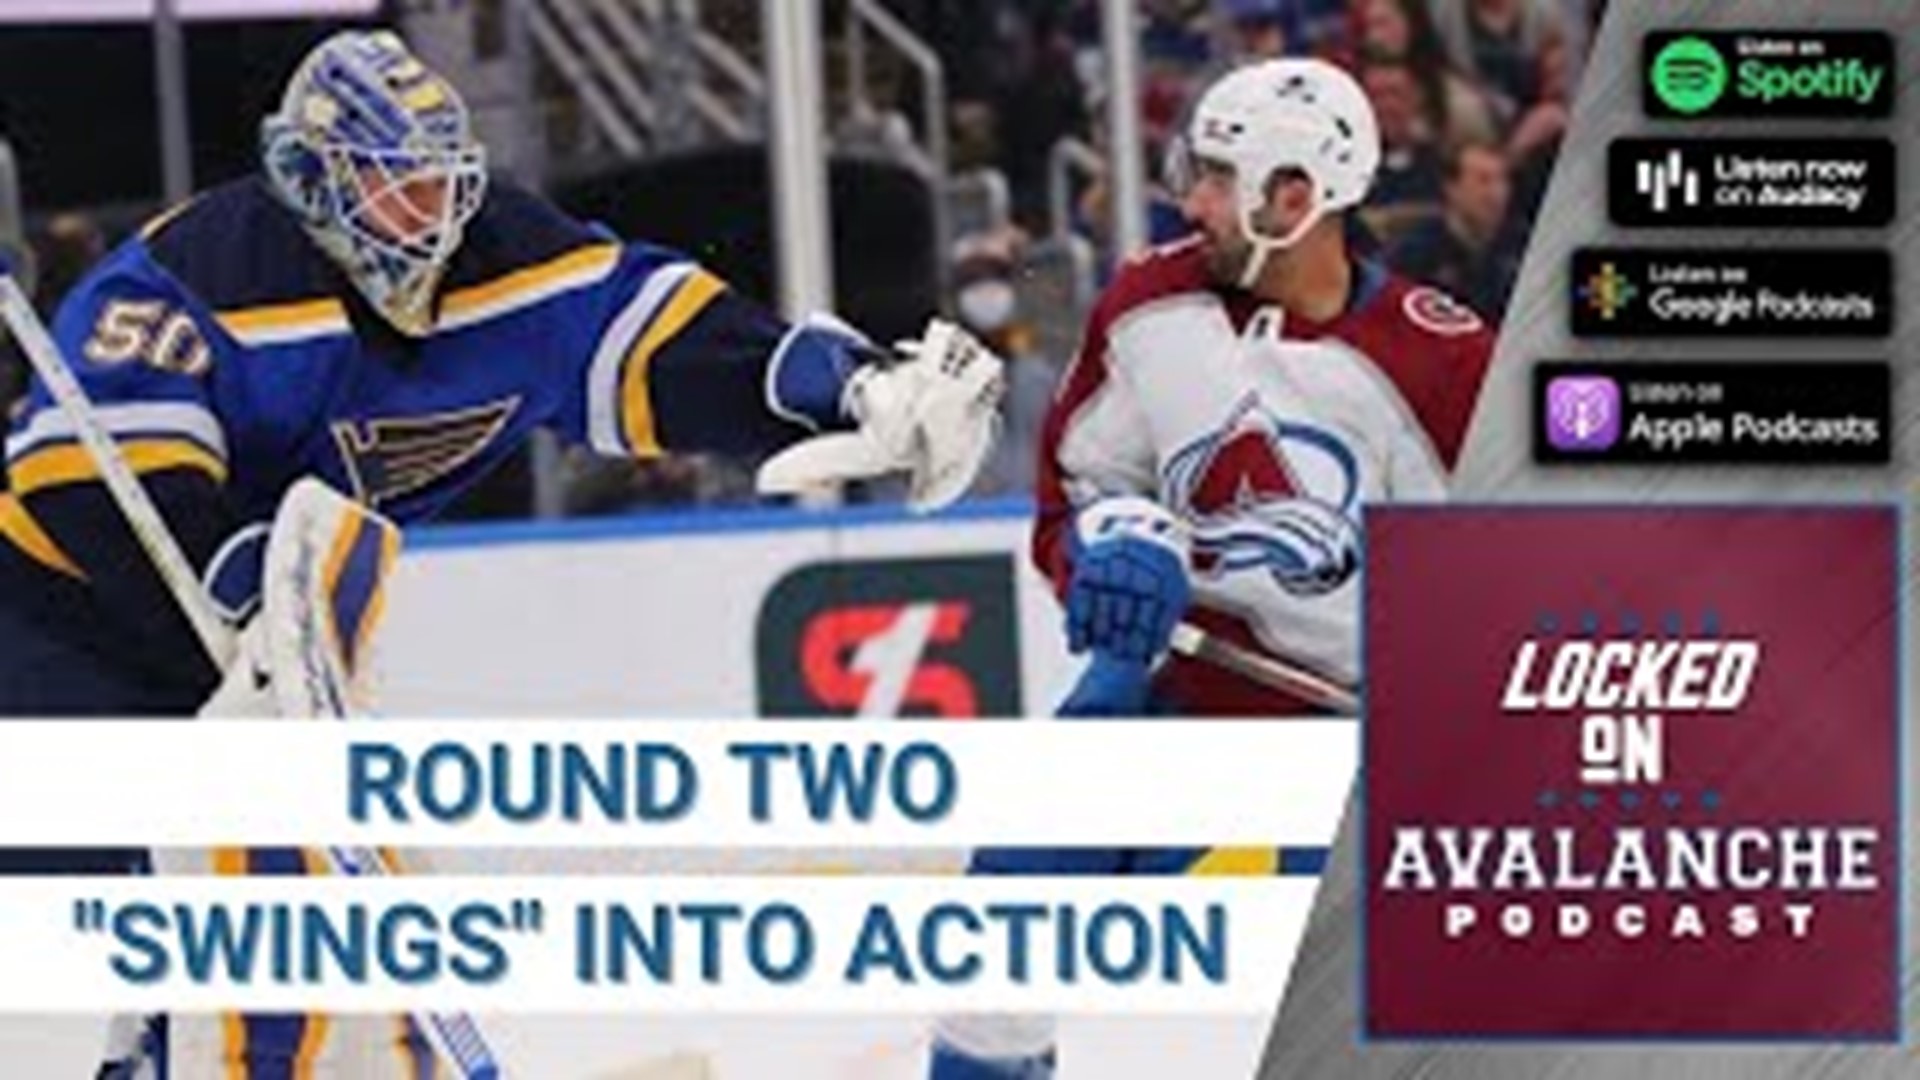 The Colorado Avalanche are up against the St. Louis Blues in the NHL playoffs. Fans are waiting to see when Game 1 will happen.